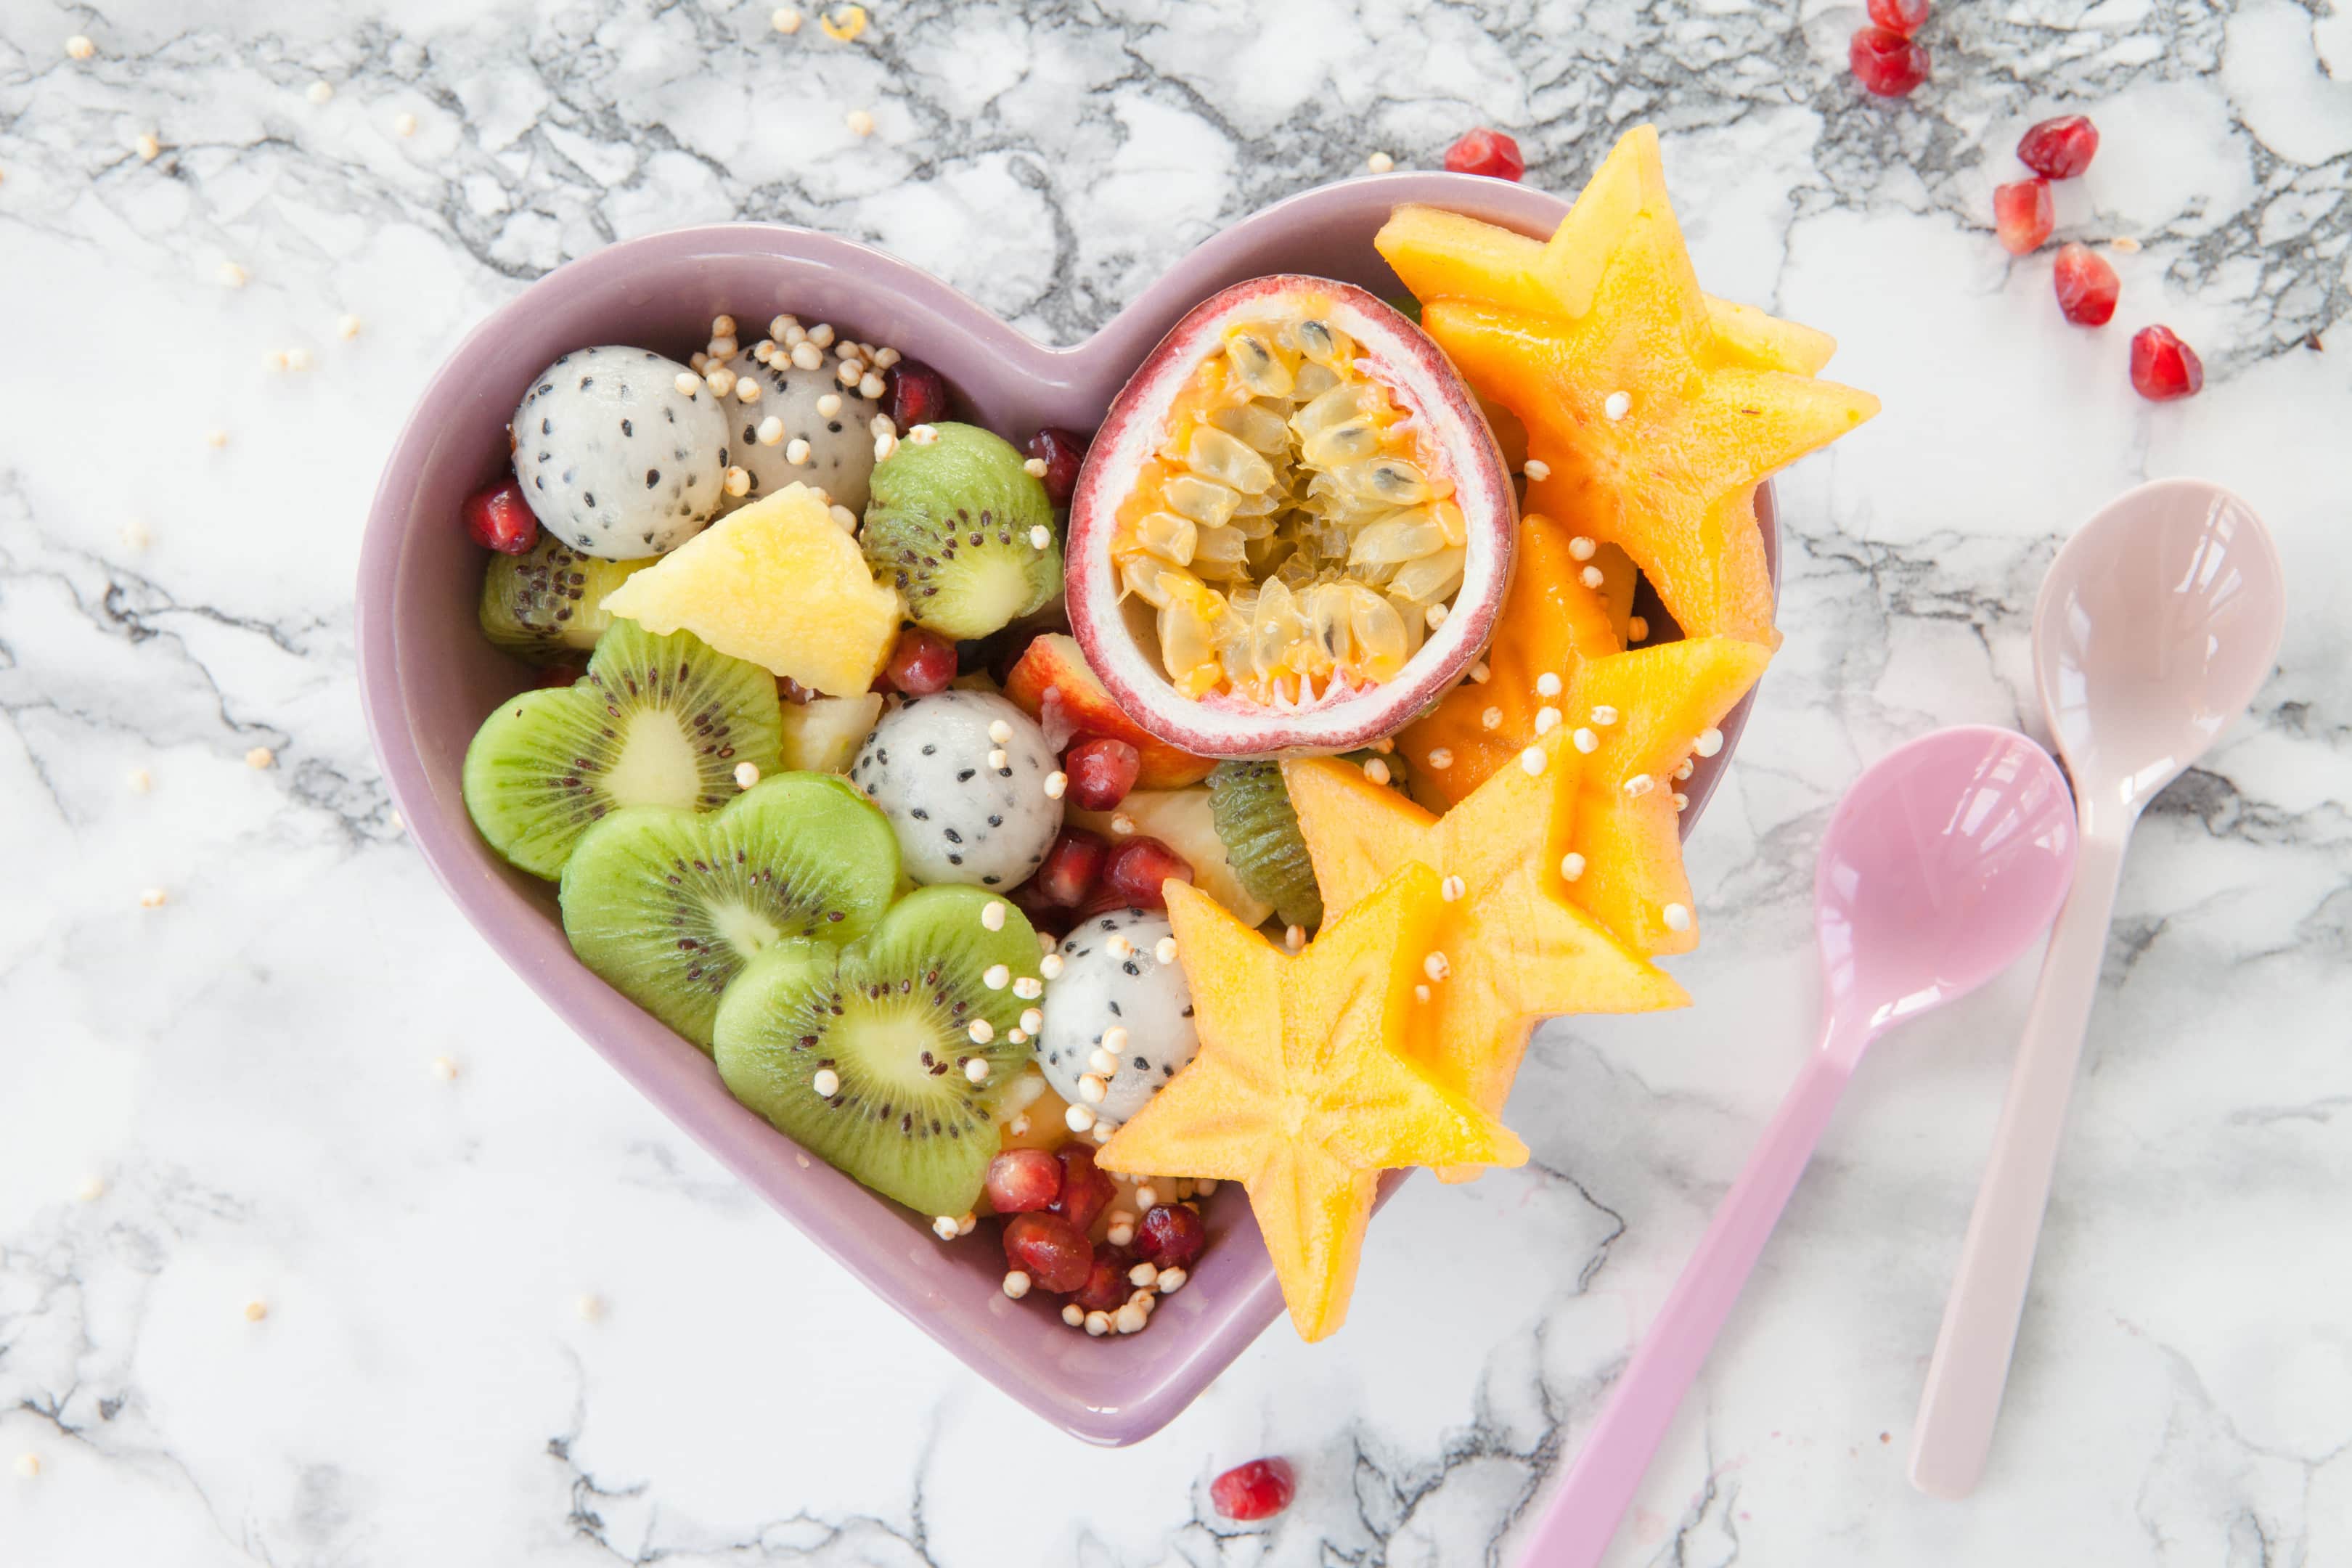 Fresh fruit salad made from exotic tropical fruits in a heart bowl